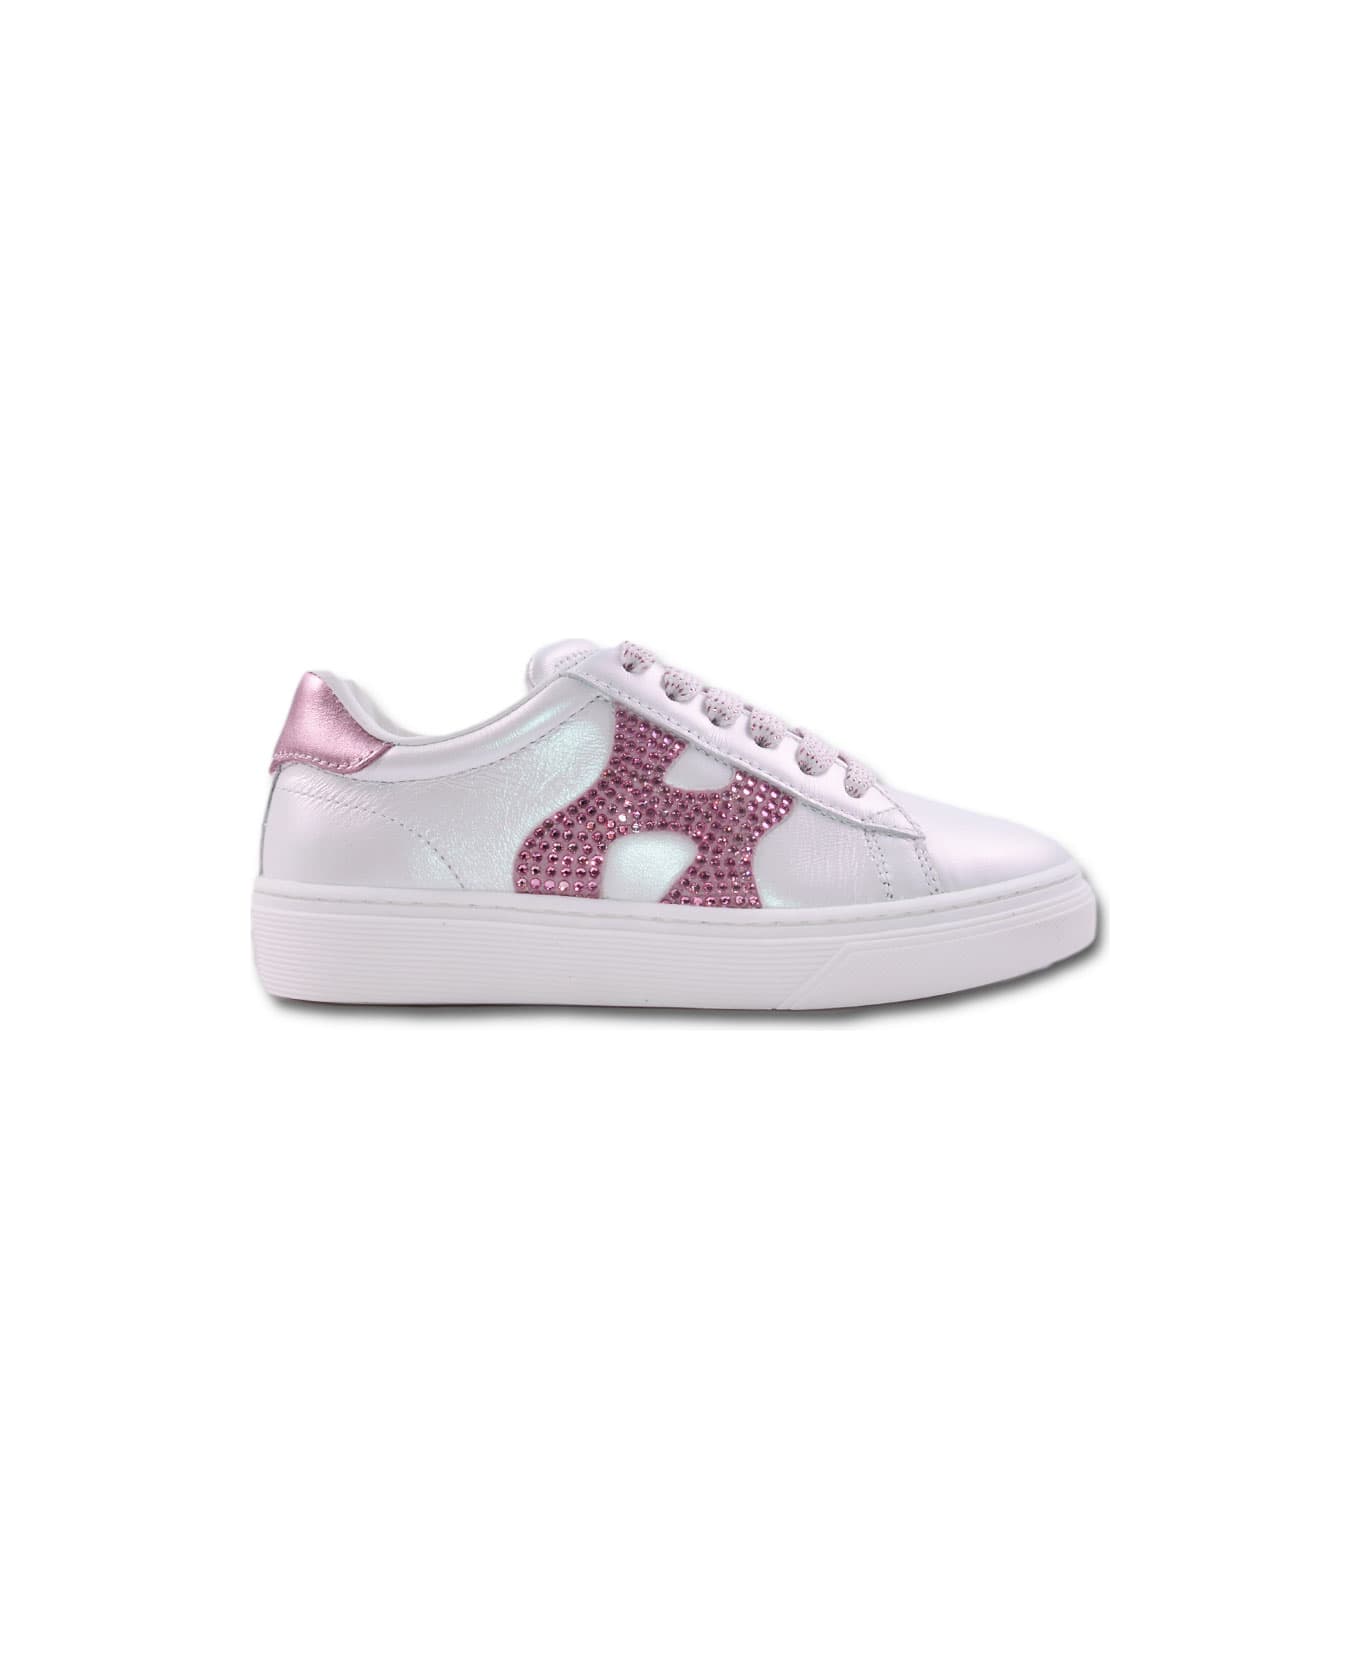 Hogan Sneakers In Pearled Smooth Leather - White